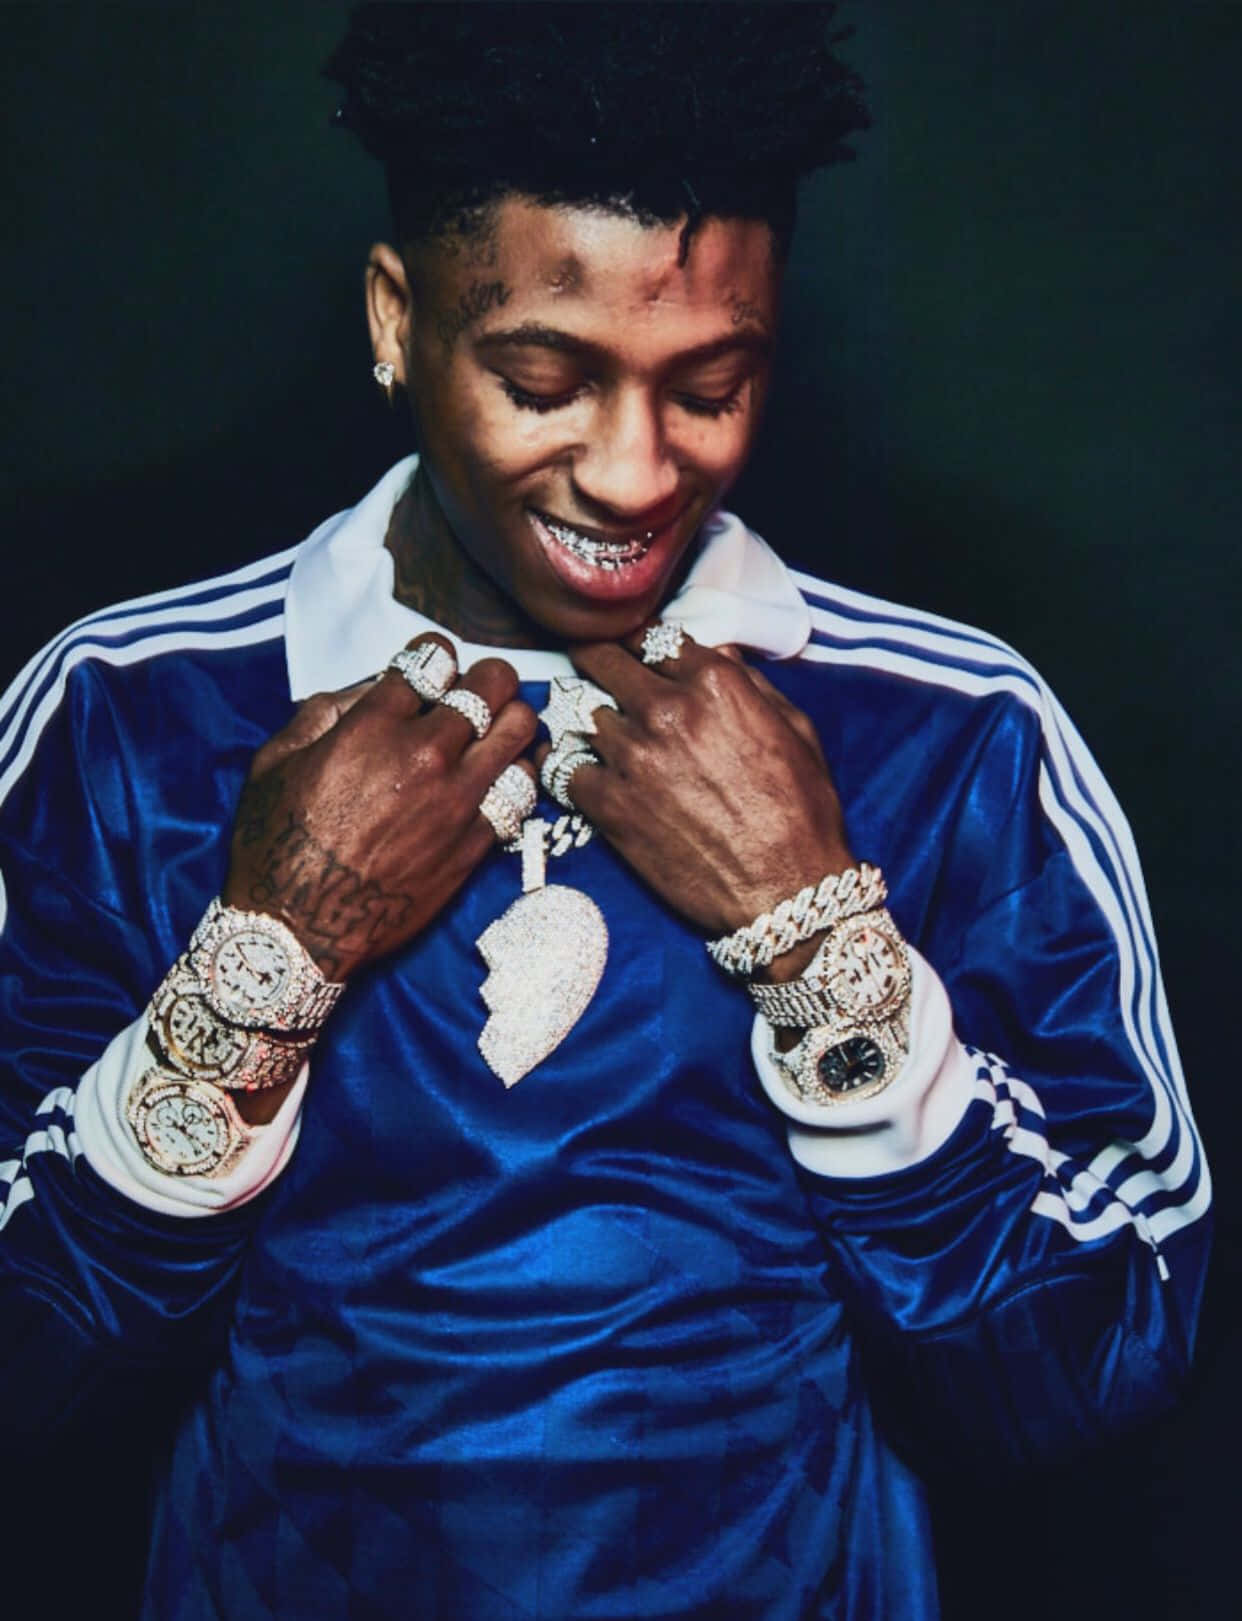 Nba Youngboy showing off a fresh look.